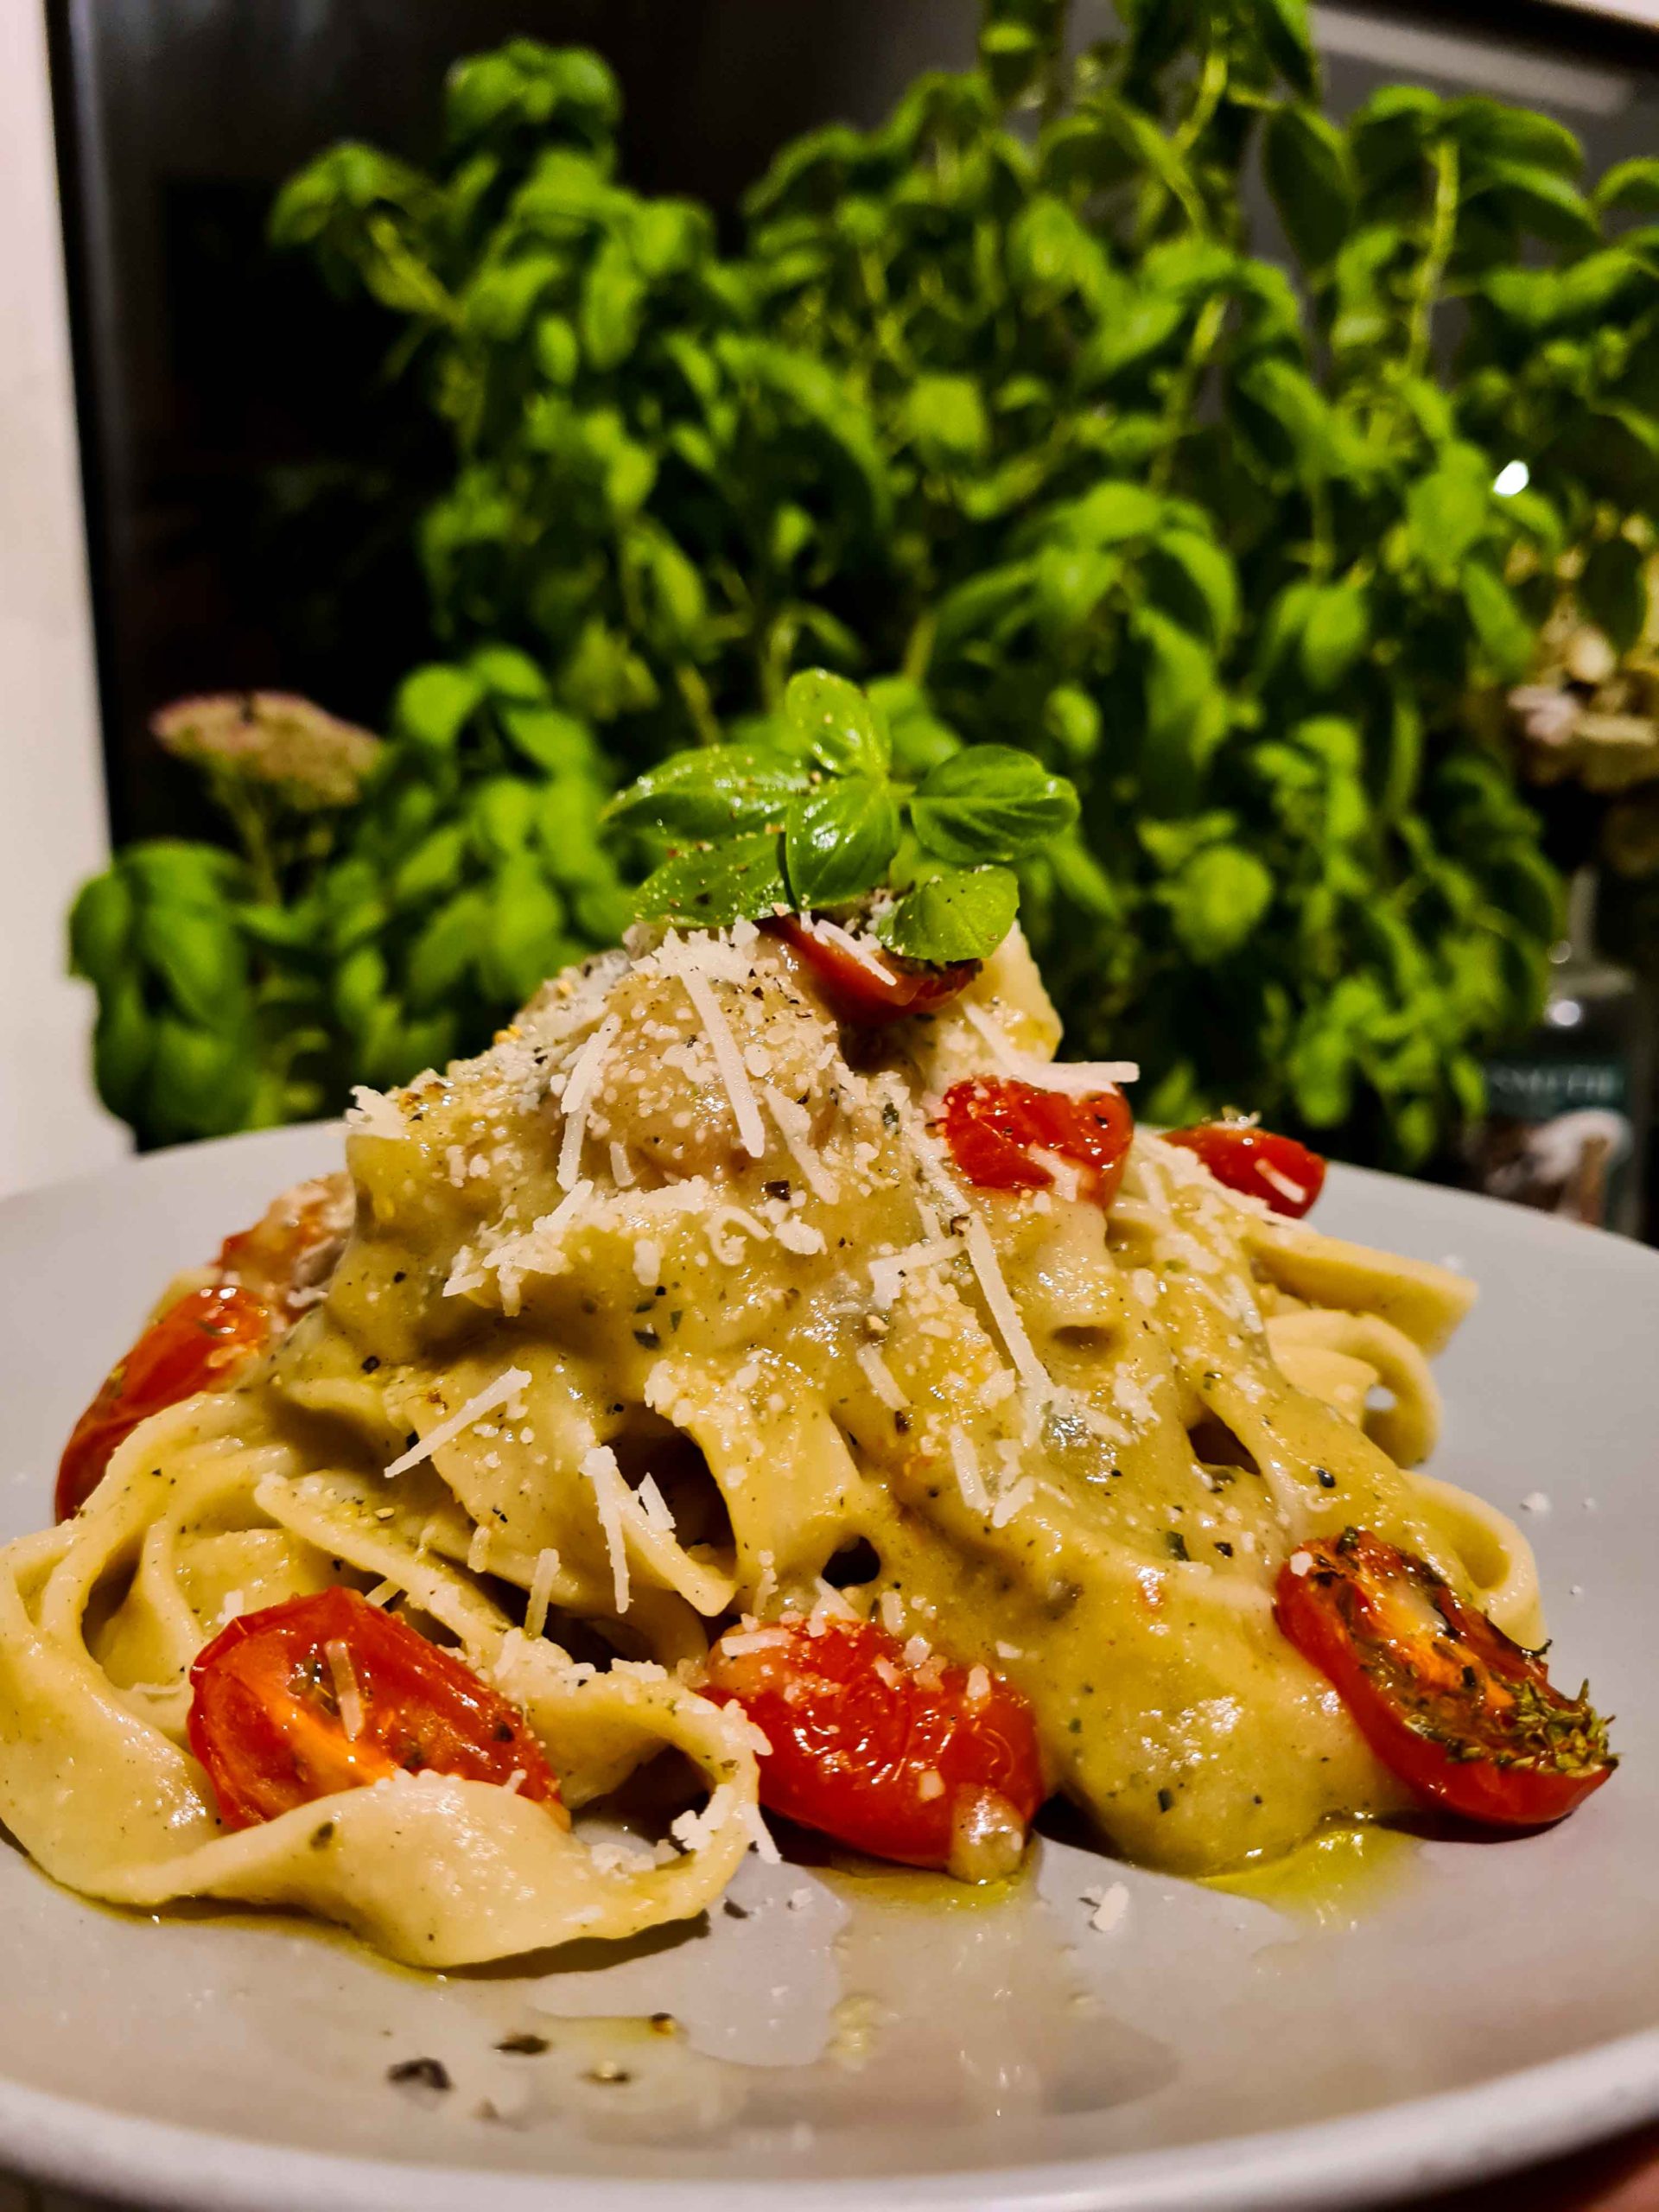 Outlet-Besonderheit! The Best Smoky Aubergine Pasta Rebecca Datterini TG With Confit Tomatoes 